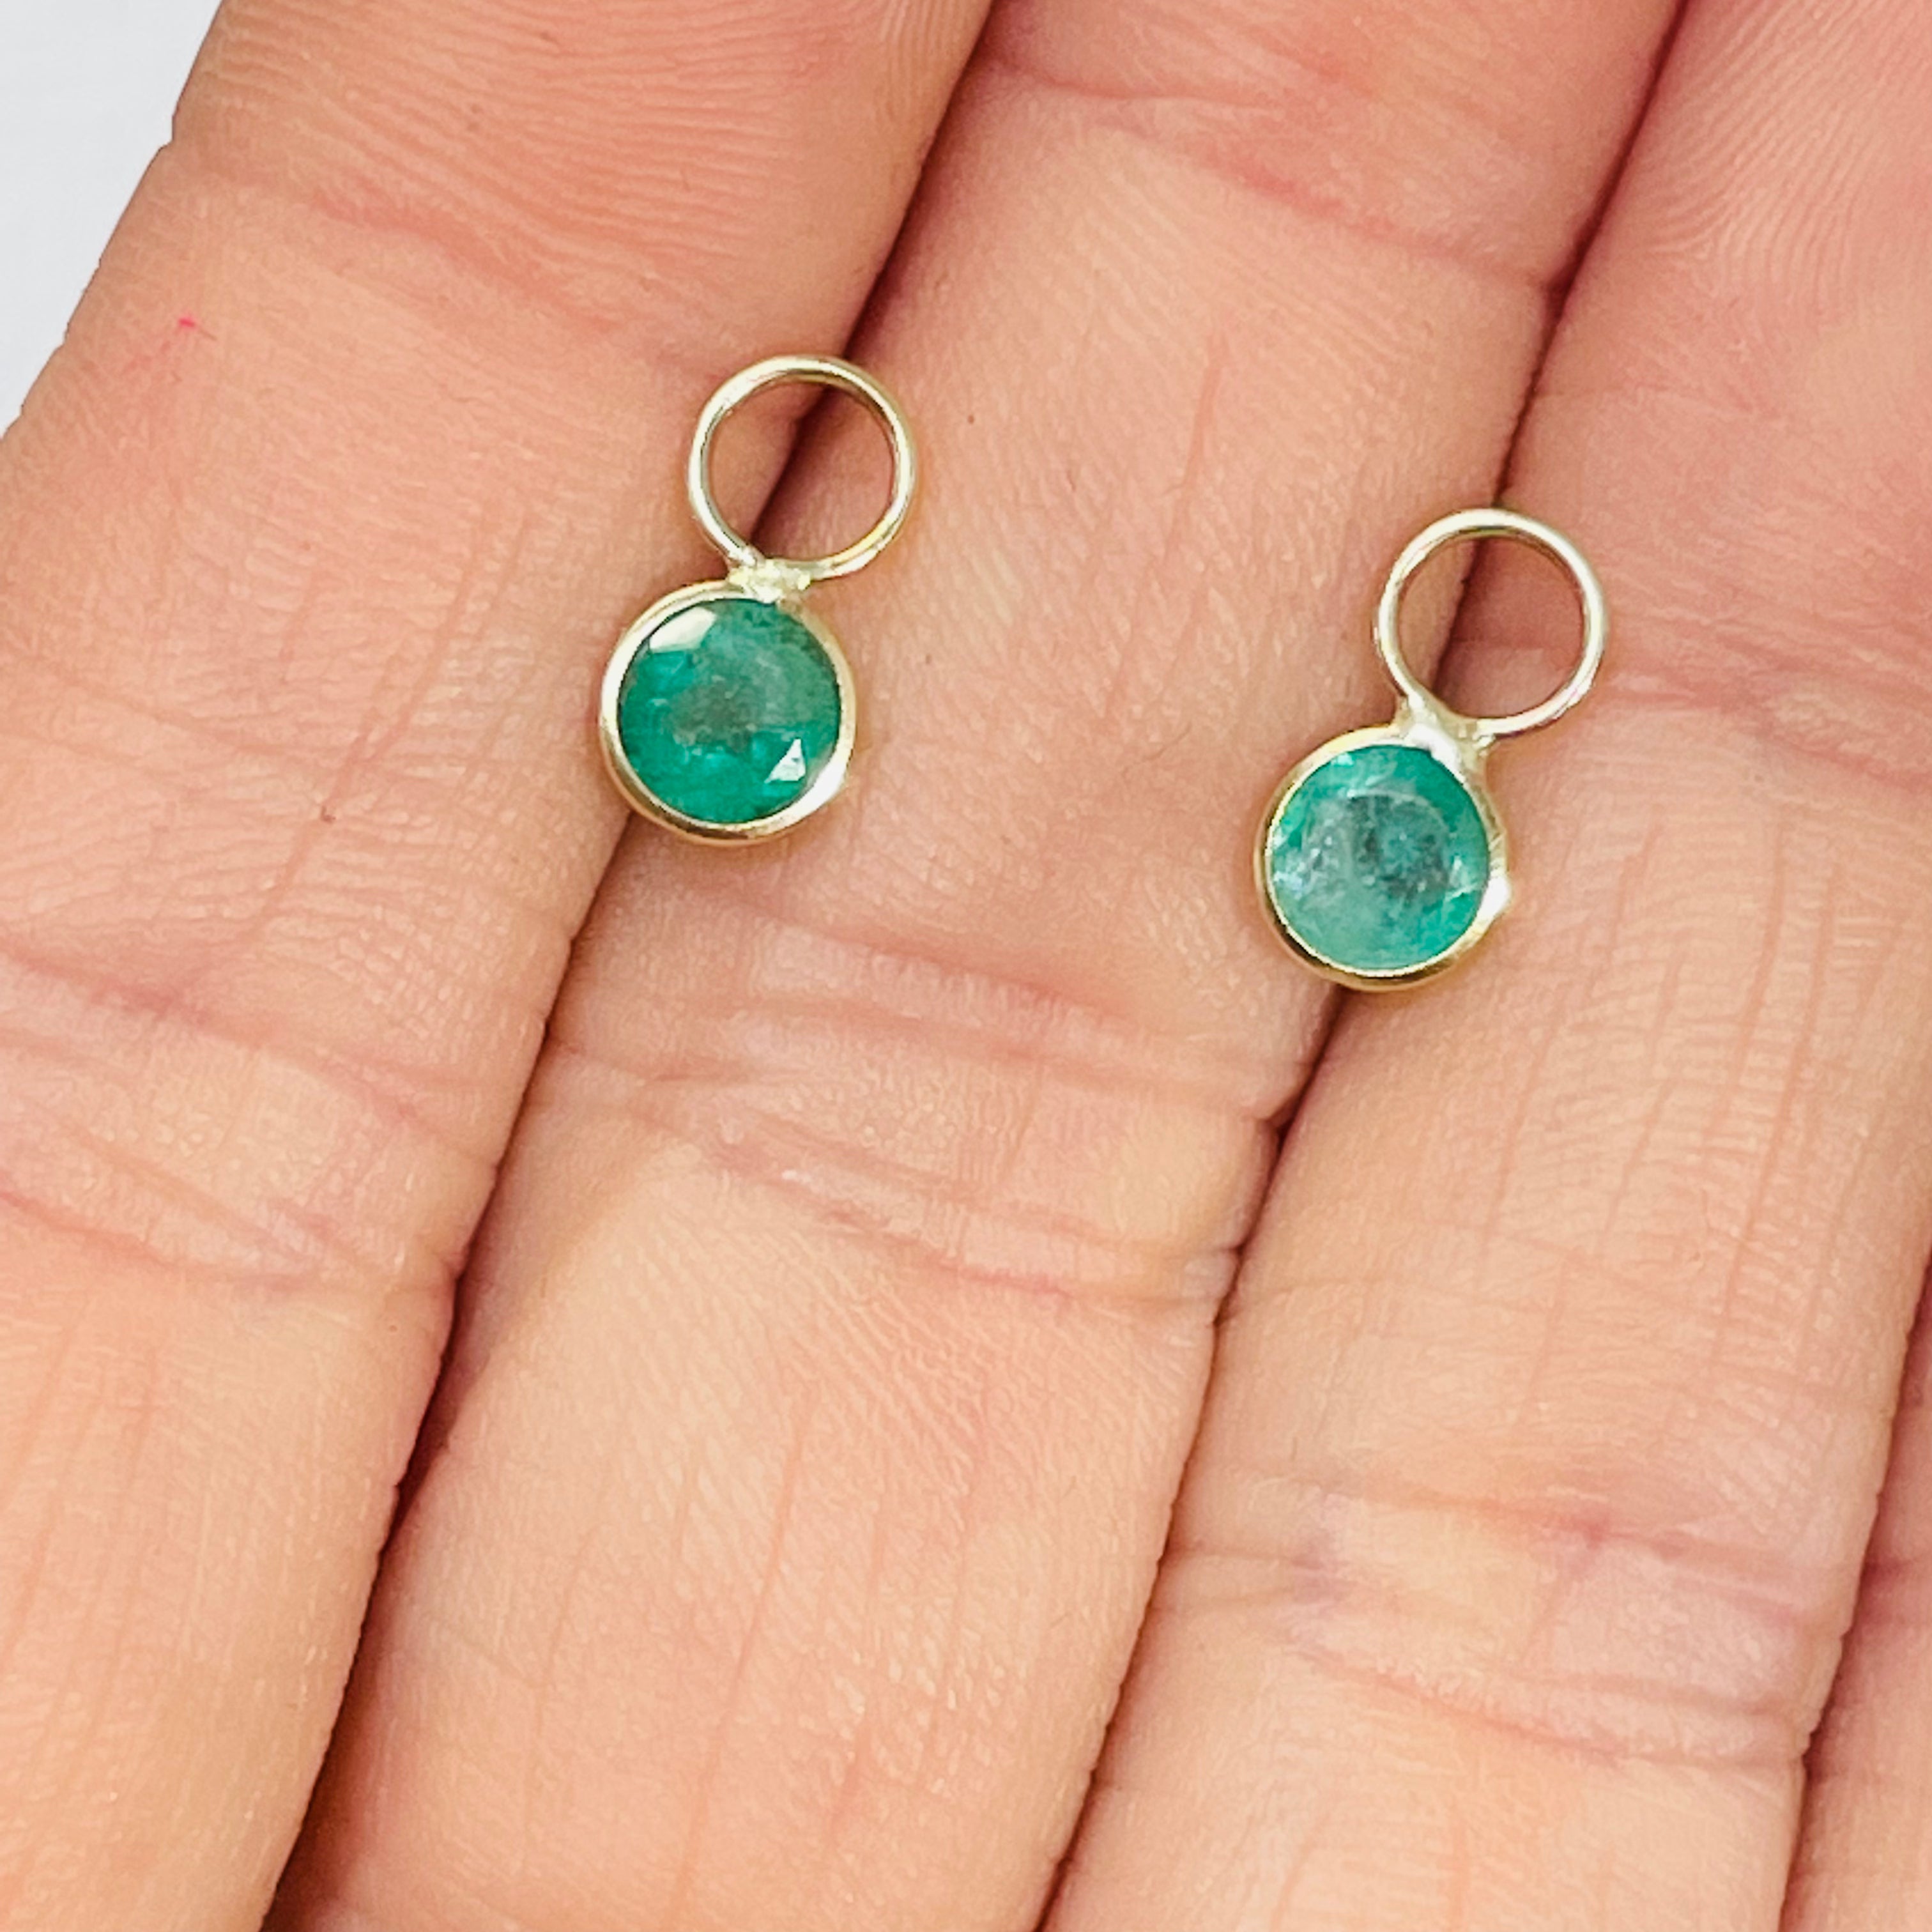 14K Yellow Gold Round Emerald Earring Charm Pair